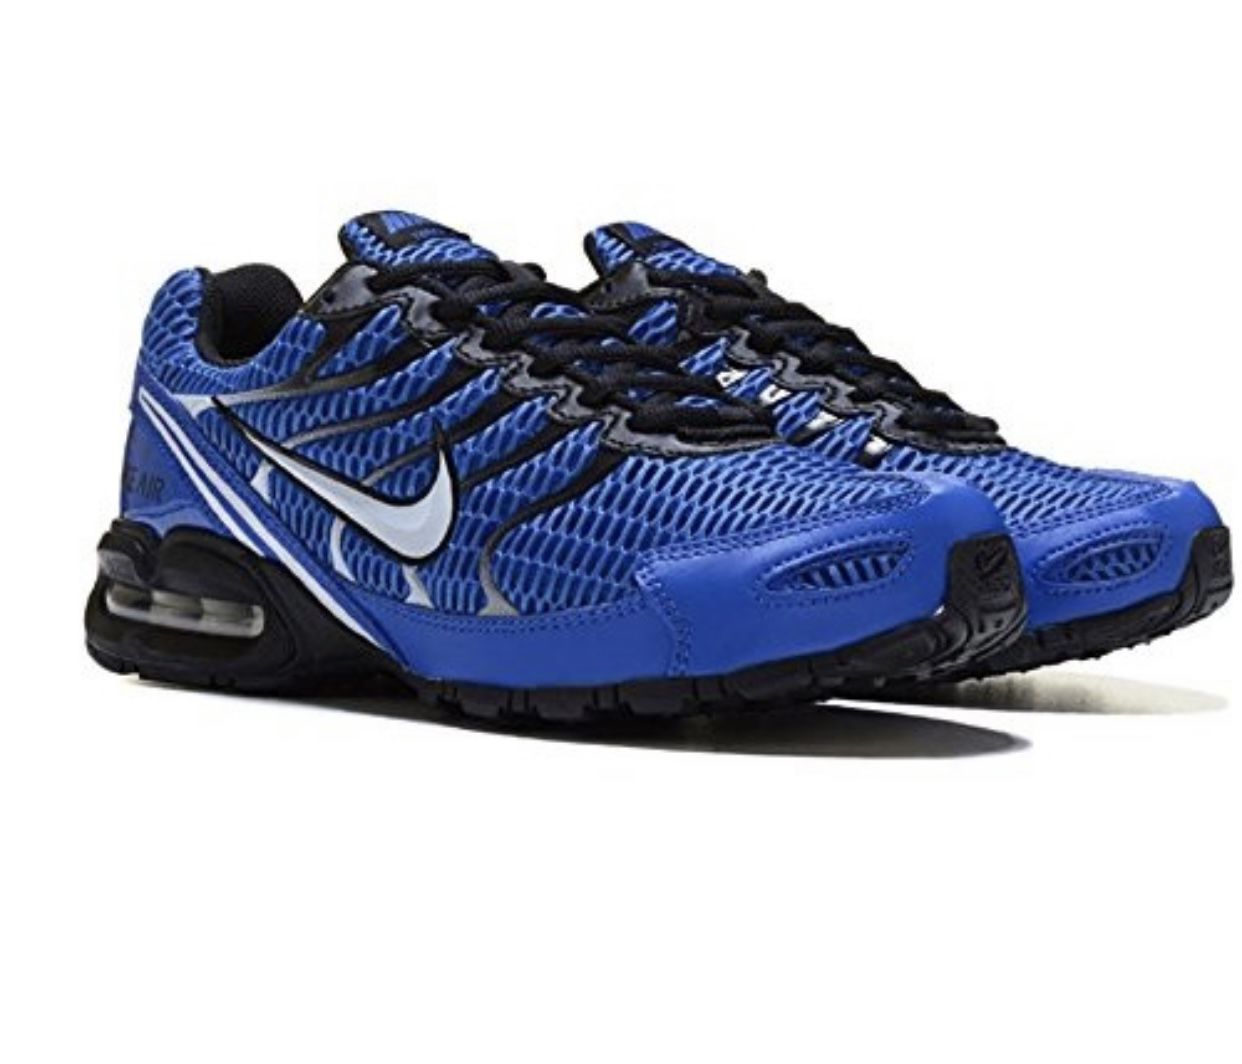 textbook Fate morphine NIKE Air Max 343846-460 Blue TORCH 4 Running Athletic Shoes Sneakers Size  14. Great Condition. Make an offer! for Sale in New York, NY - OfferUp